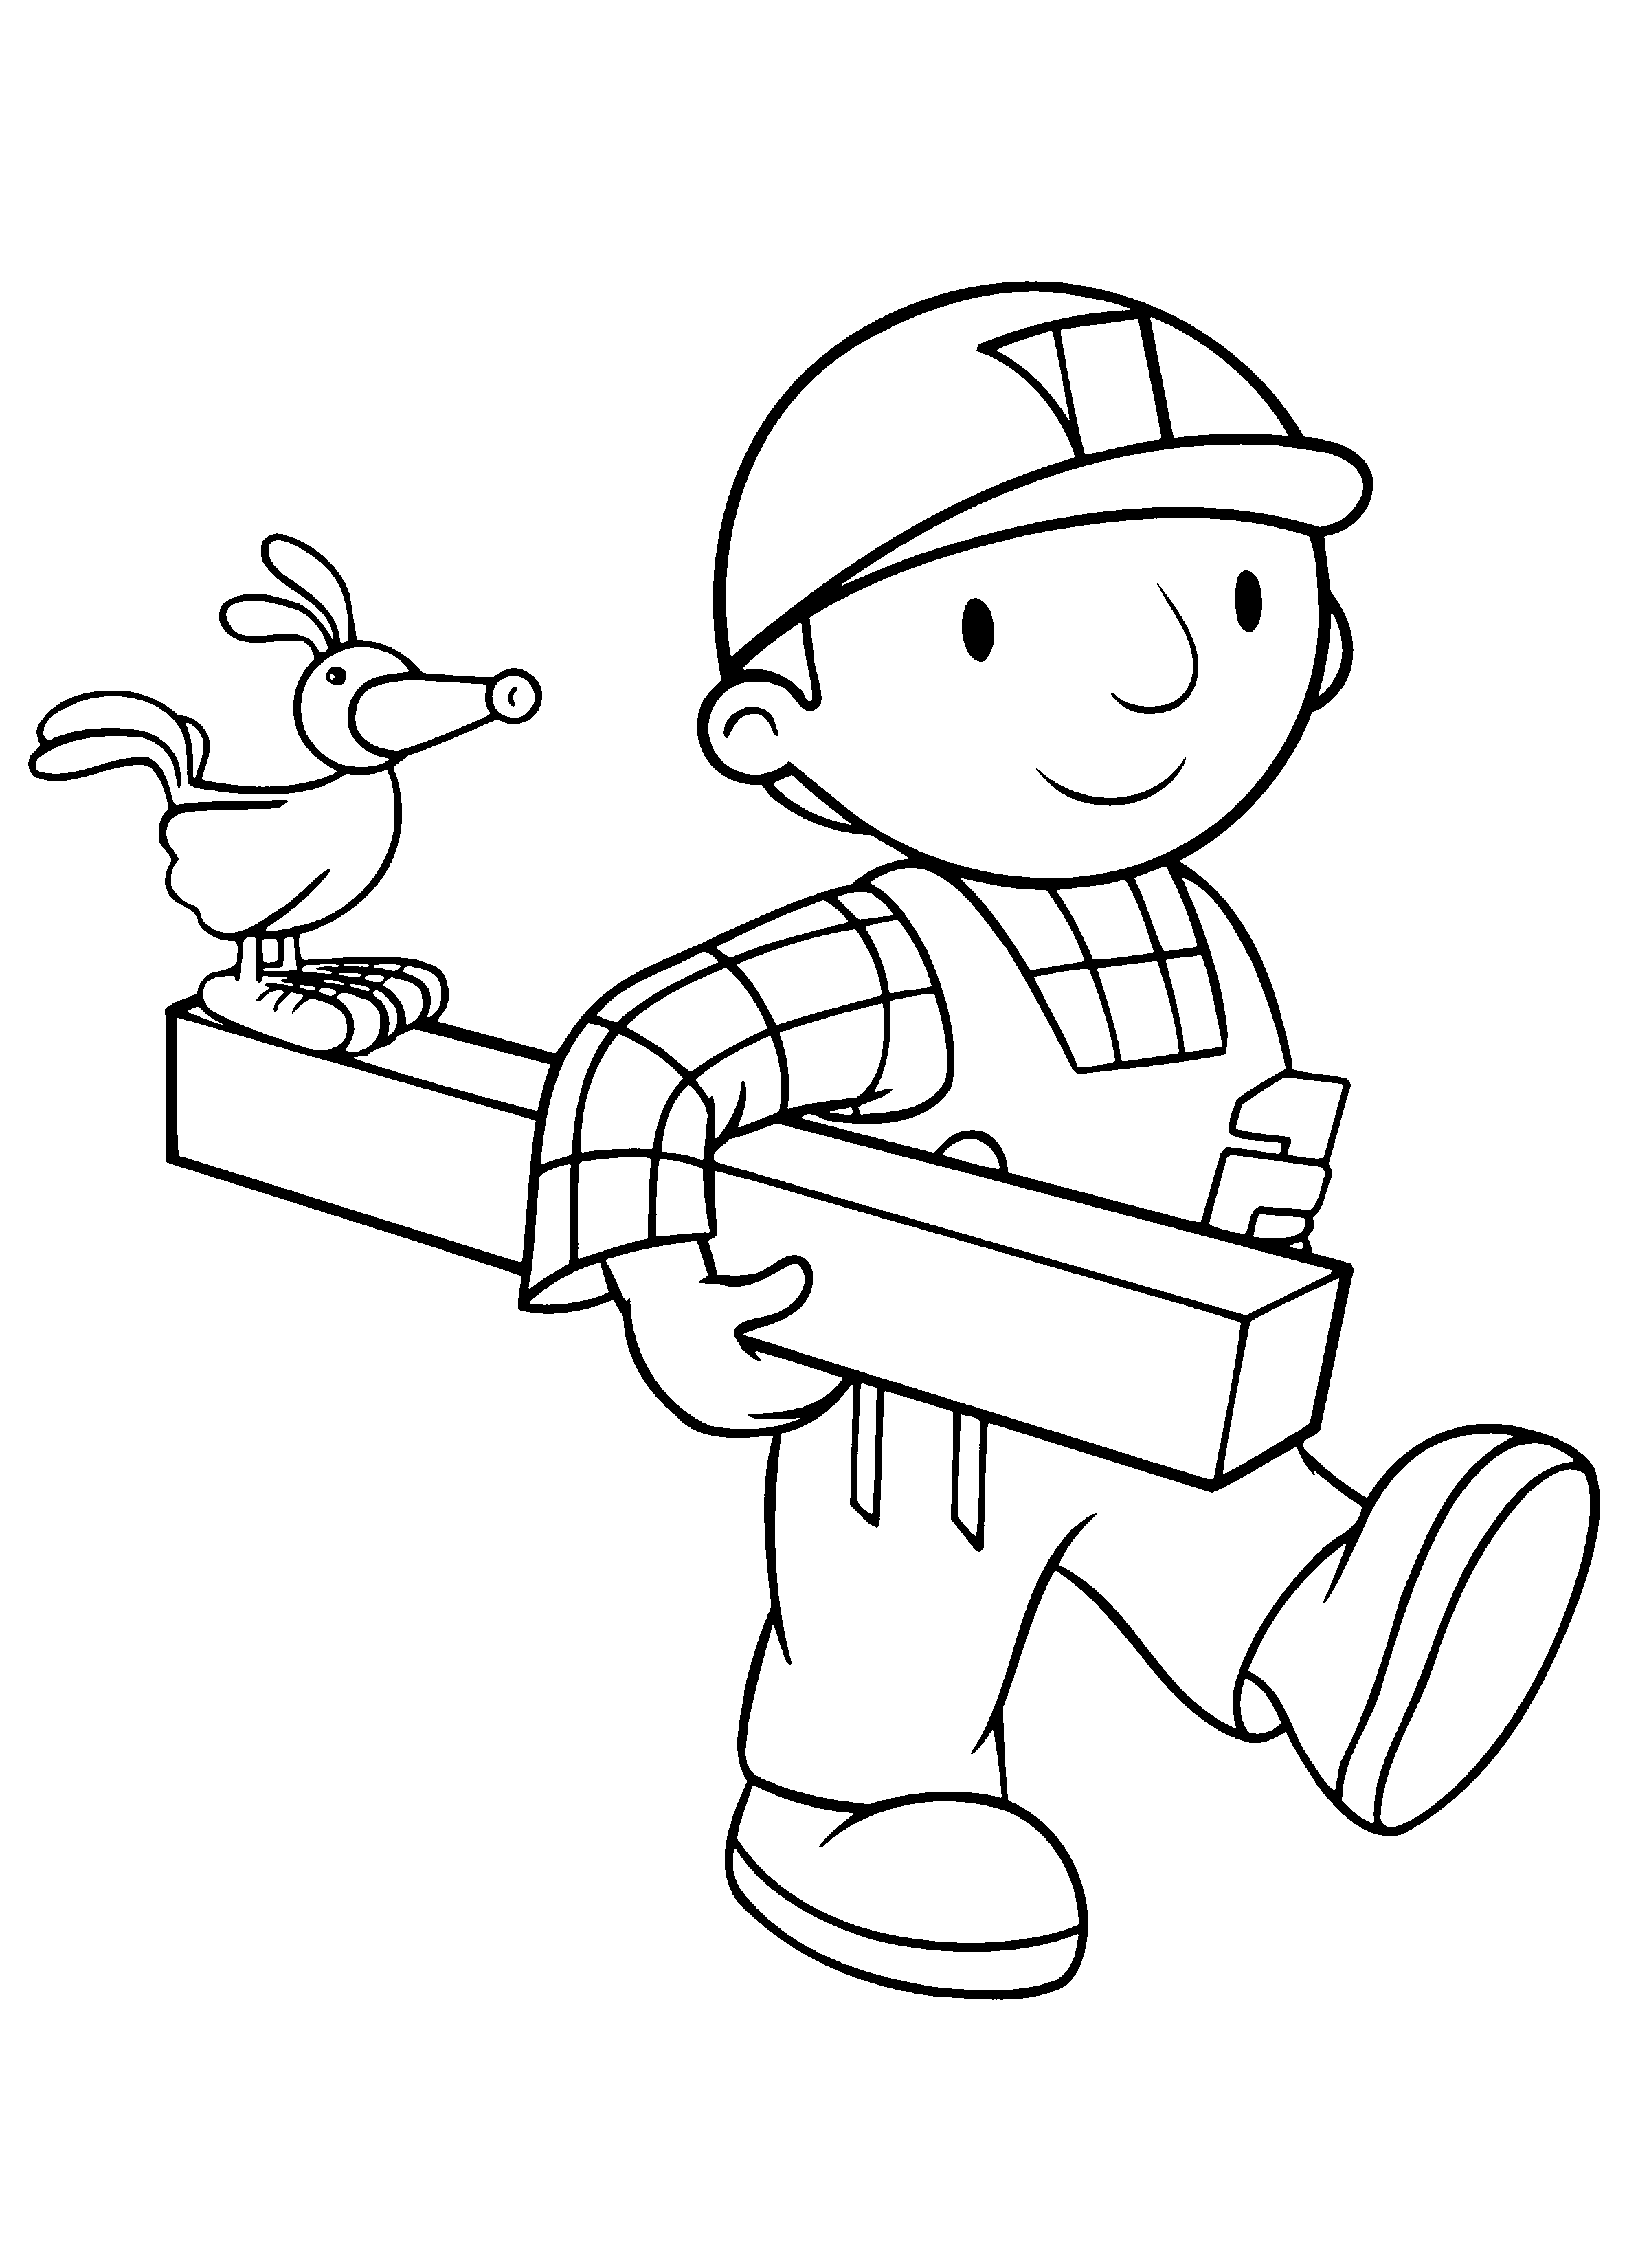 Free Bob The Builder coloring page